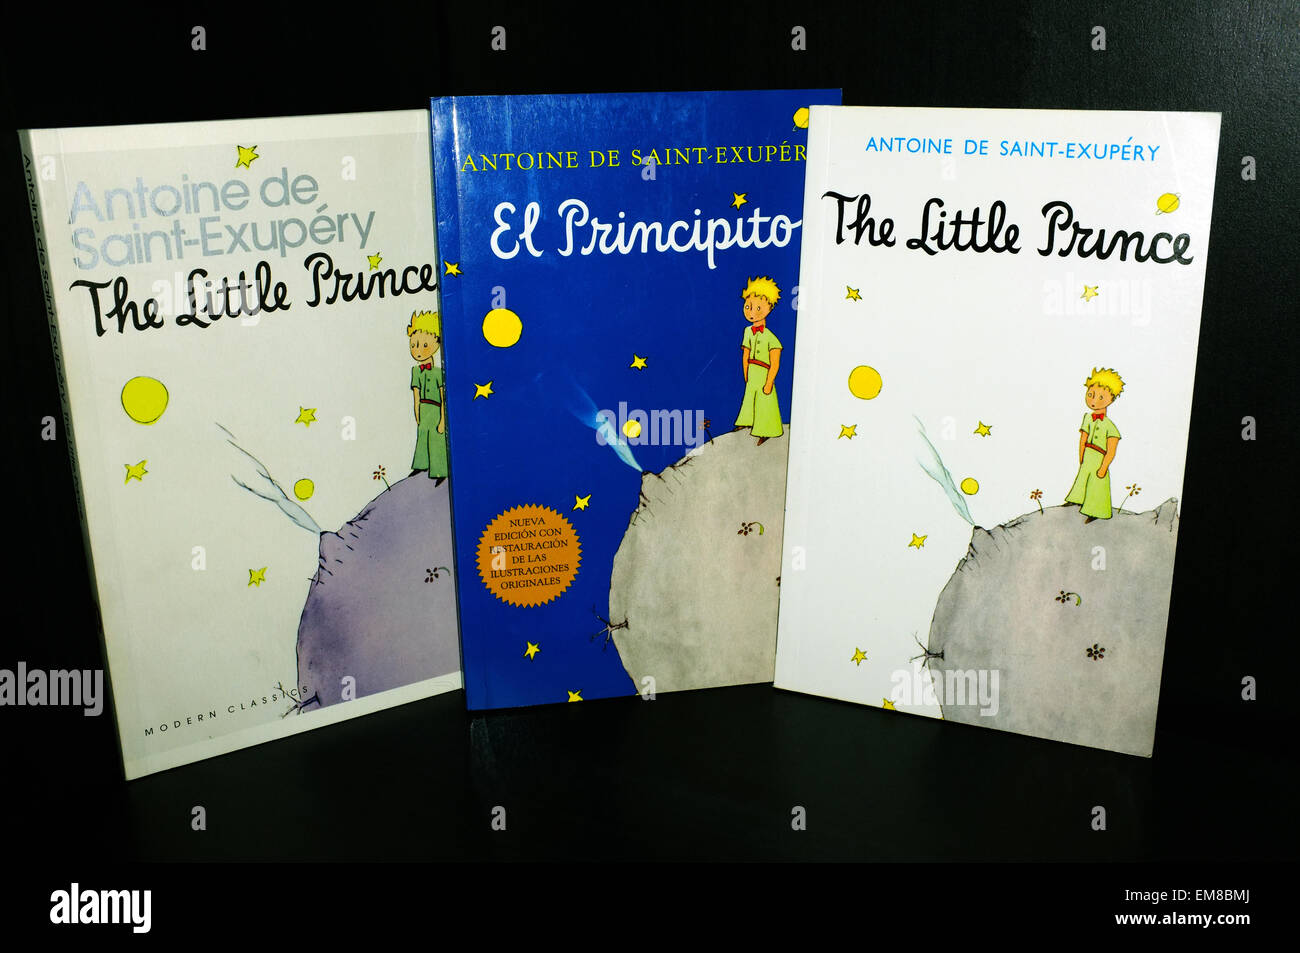 Three versions of The Little Prince one of the most read books in the world. Stock Photo